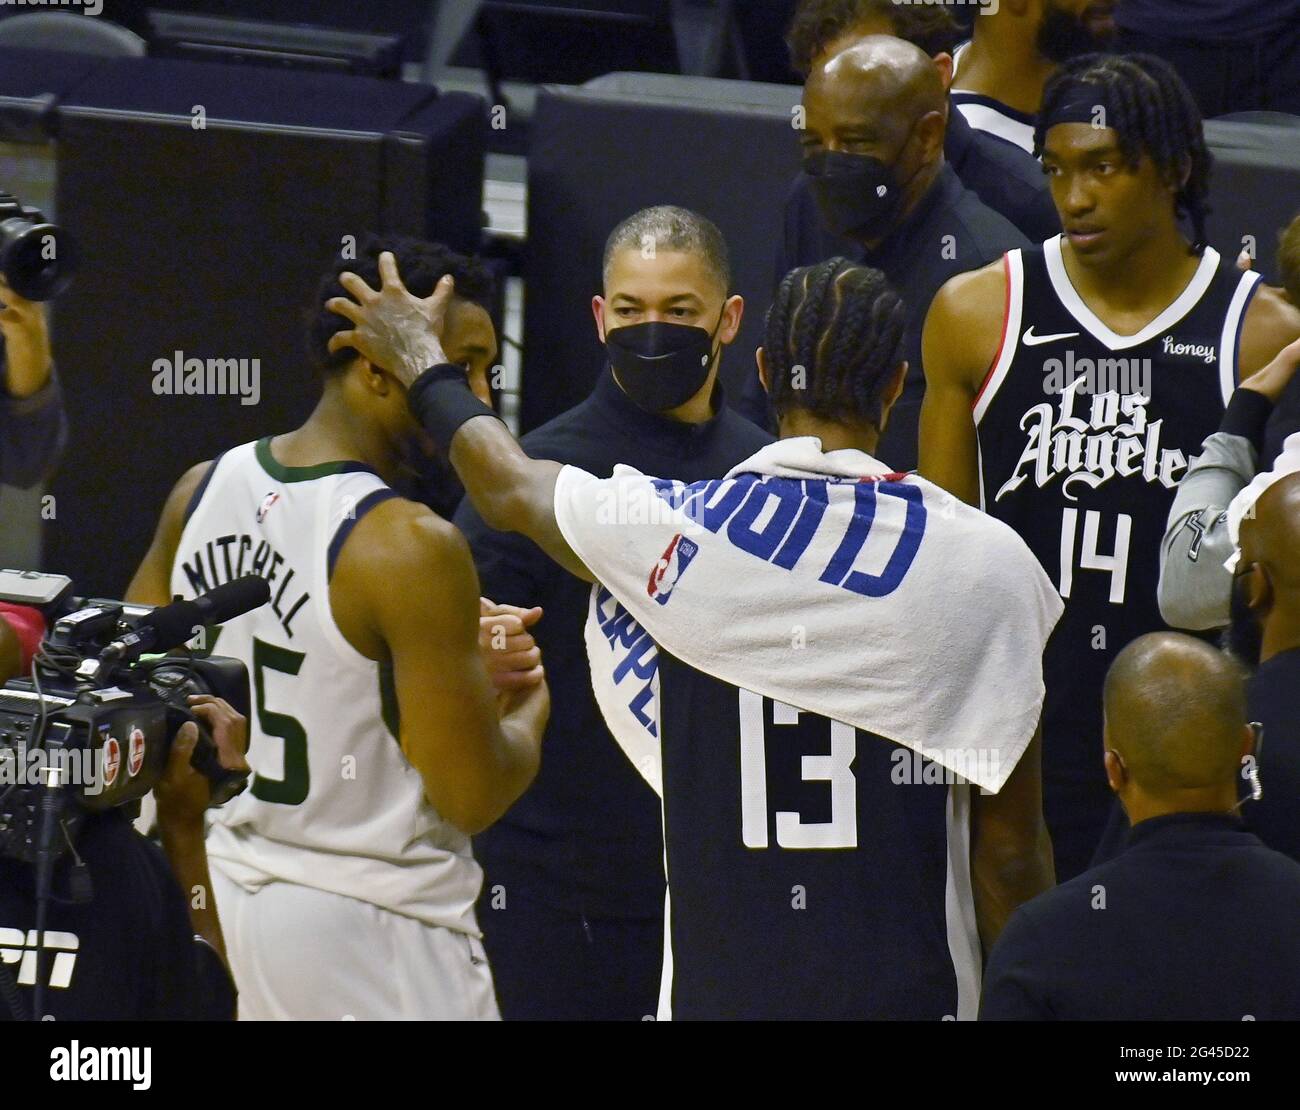 Los Angeles, USA. 19th June, 2021. Los Angeles Clippers guard Paul George (13) rubs Utah Jazz guard Donovan Mitchell's (45) head as Clippers coach Tyronn Lue (C) shakes his hand and guard Terance Mann (14) looks on at the end of Games 6 of their best-of-seven second-round playoff series at Staples Center in Los Angeles on Friday, June 18, 2021. The Clippers eliminated the top-seeded Jazz with a 131-119 win in front of Los Angeles' biggest NBA crowd since the pandemic shut down sports in March 2020. Photo by Jim Ruymen/UPI Credit: UPI/Alamy Live News Stock Photo